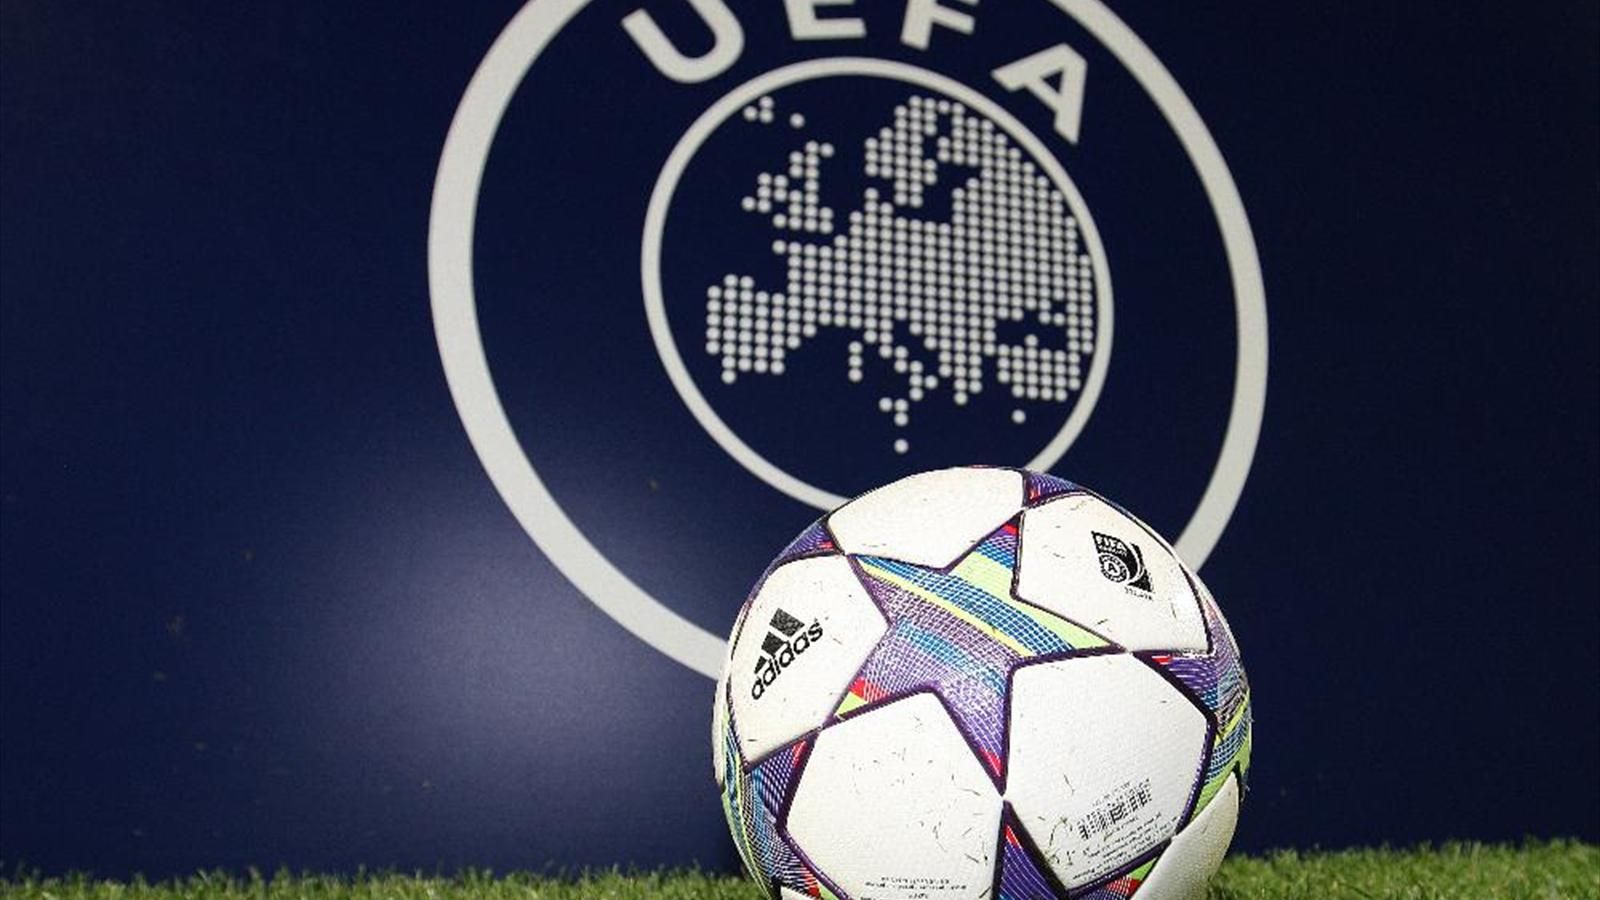 UEFA named three conditions for clubs